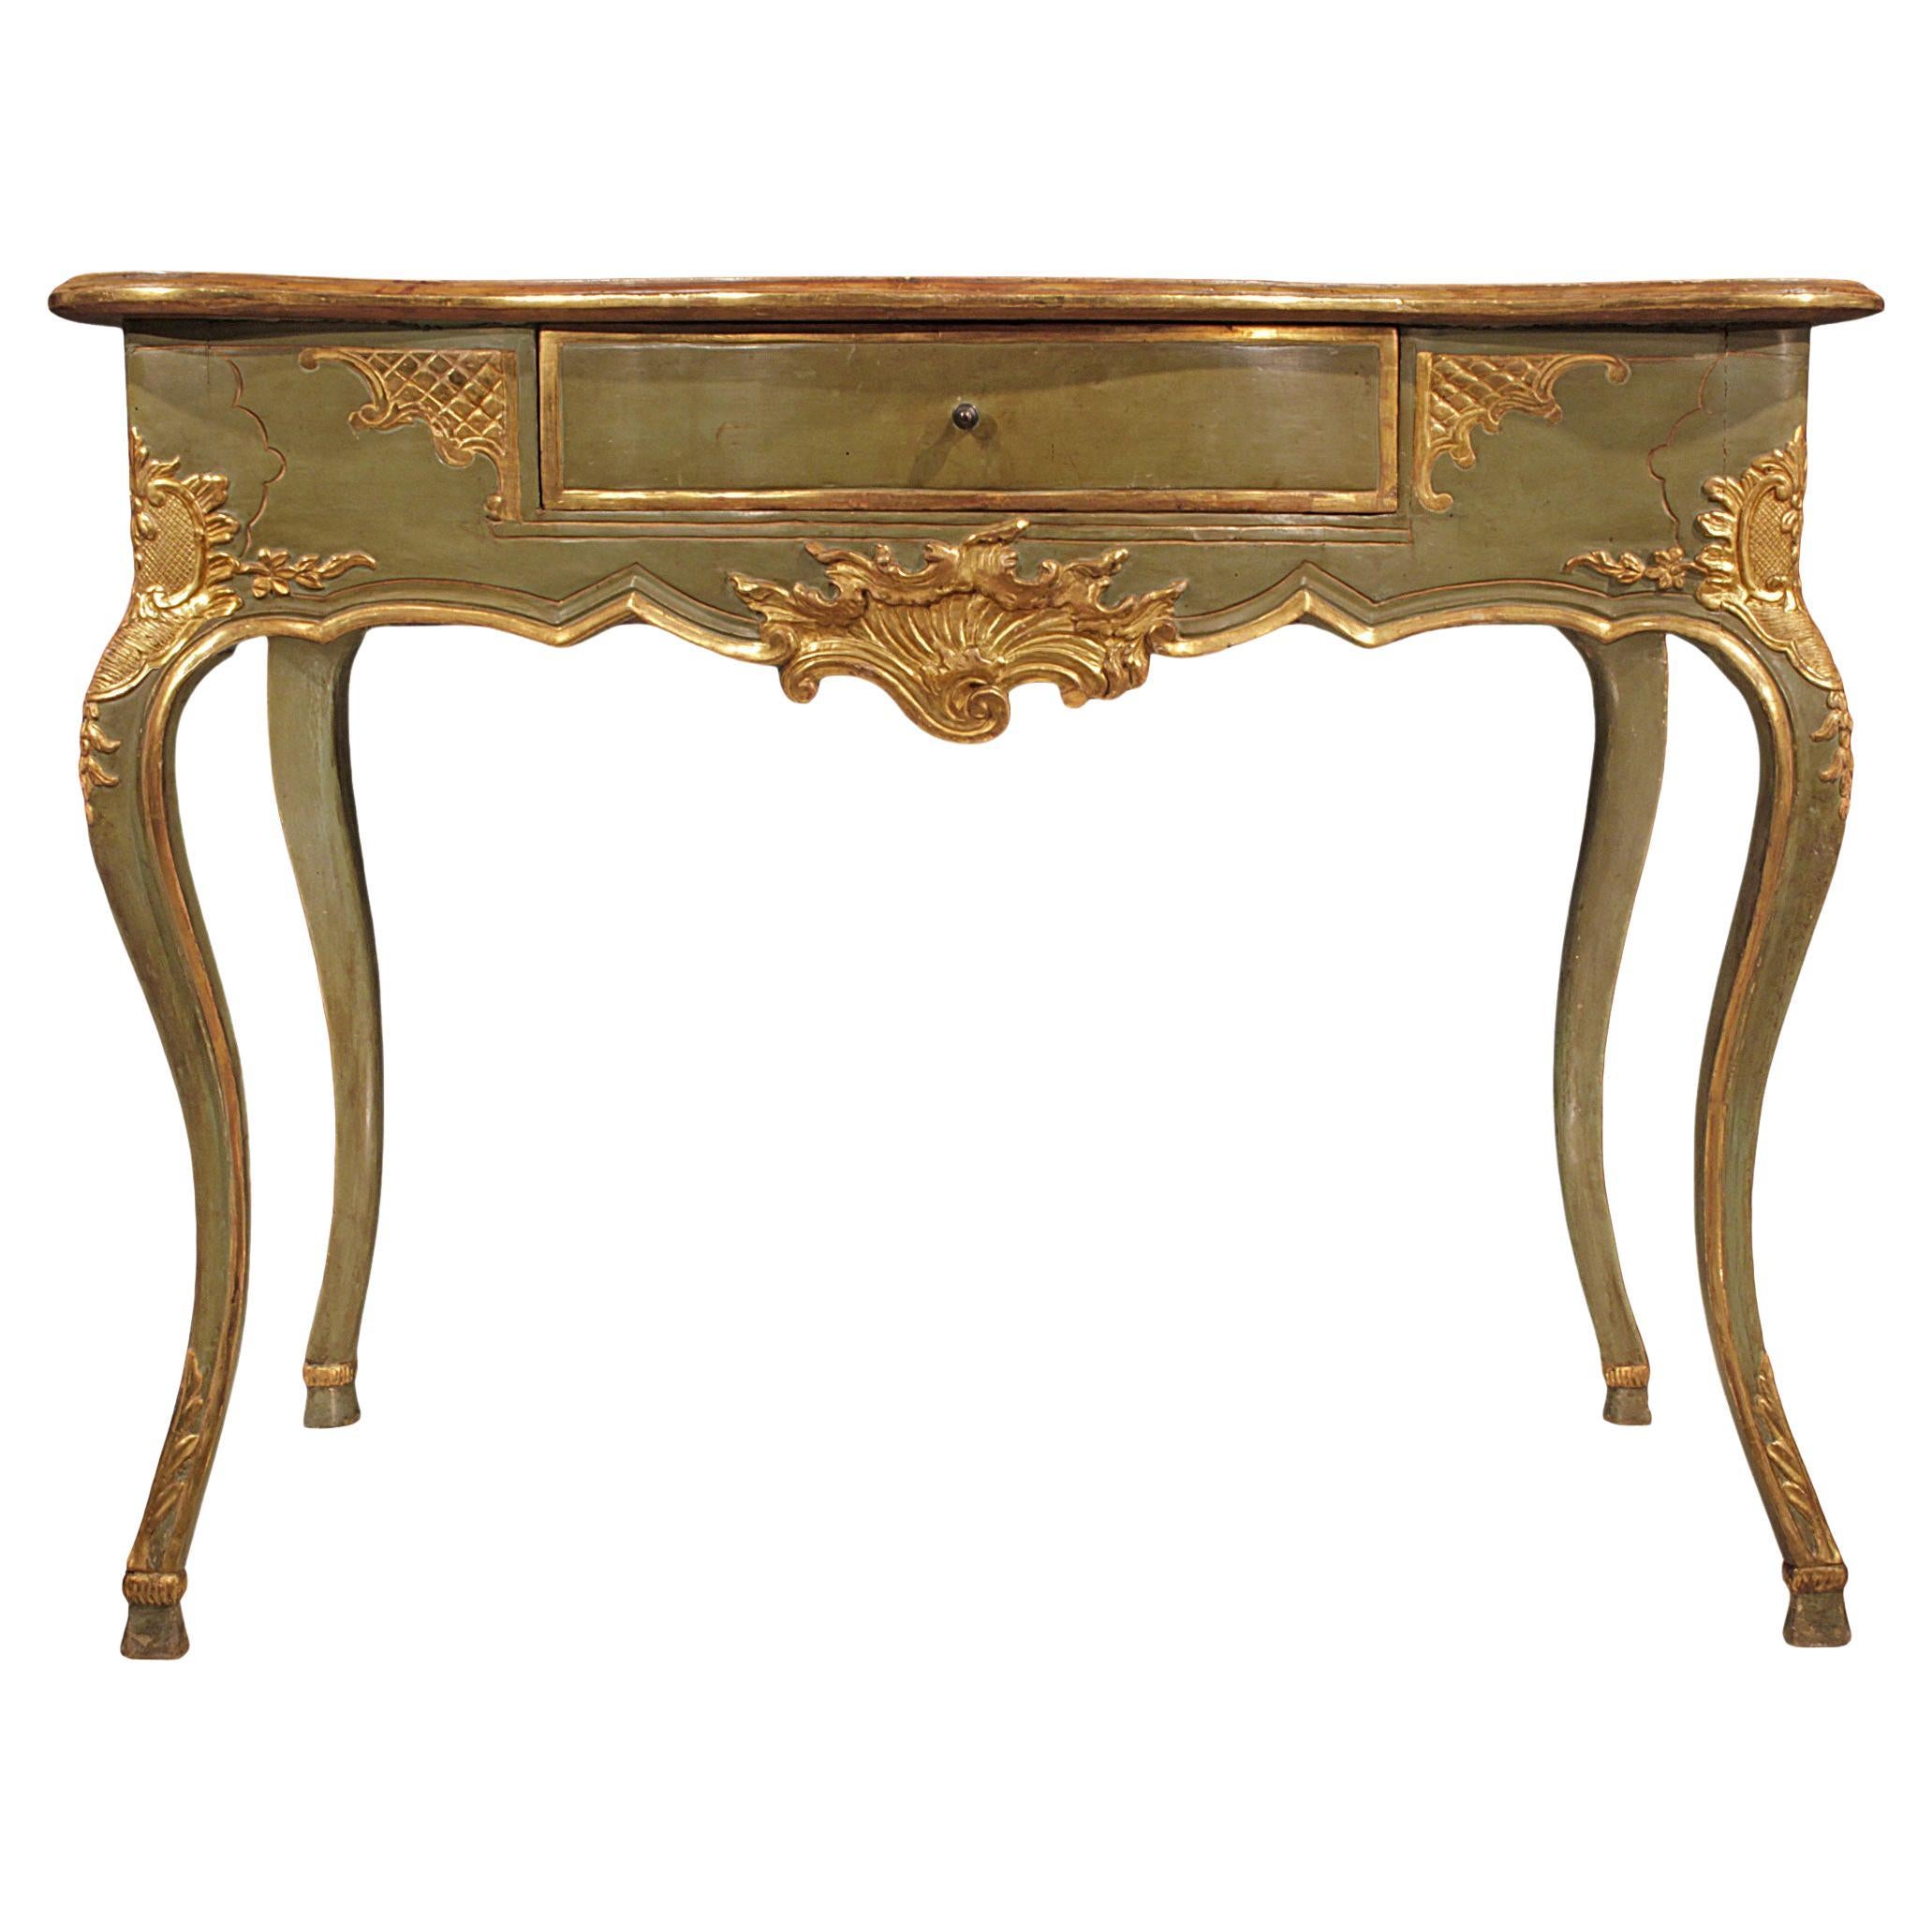 Italian 18th Century Louis XV Period Patinated Green and Gilt Console